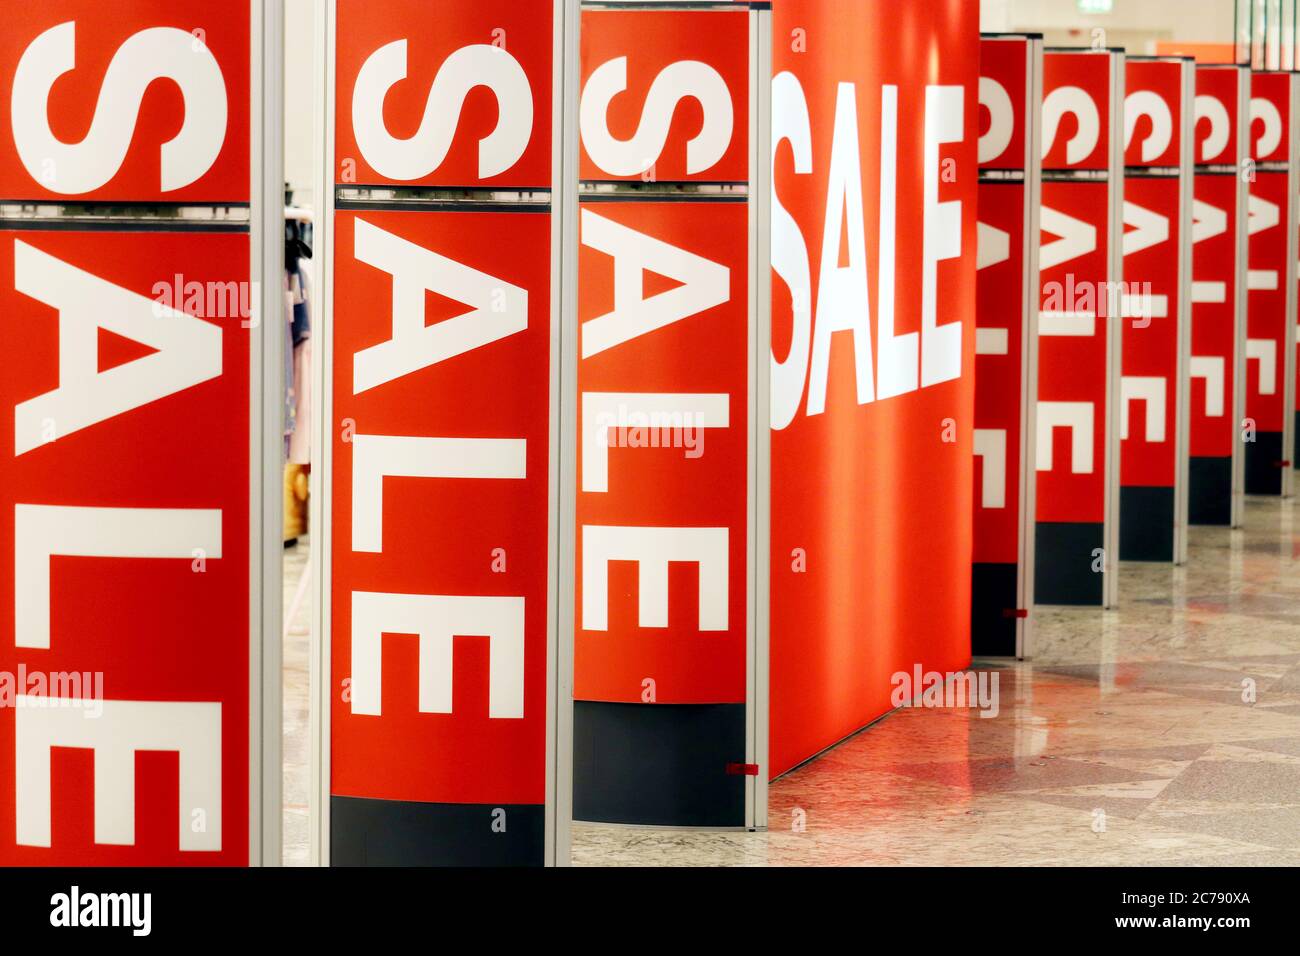 Light boards with sale signs on in a store. Concept of shopping, sales, discounts Stock Photo